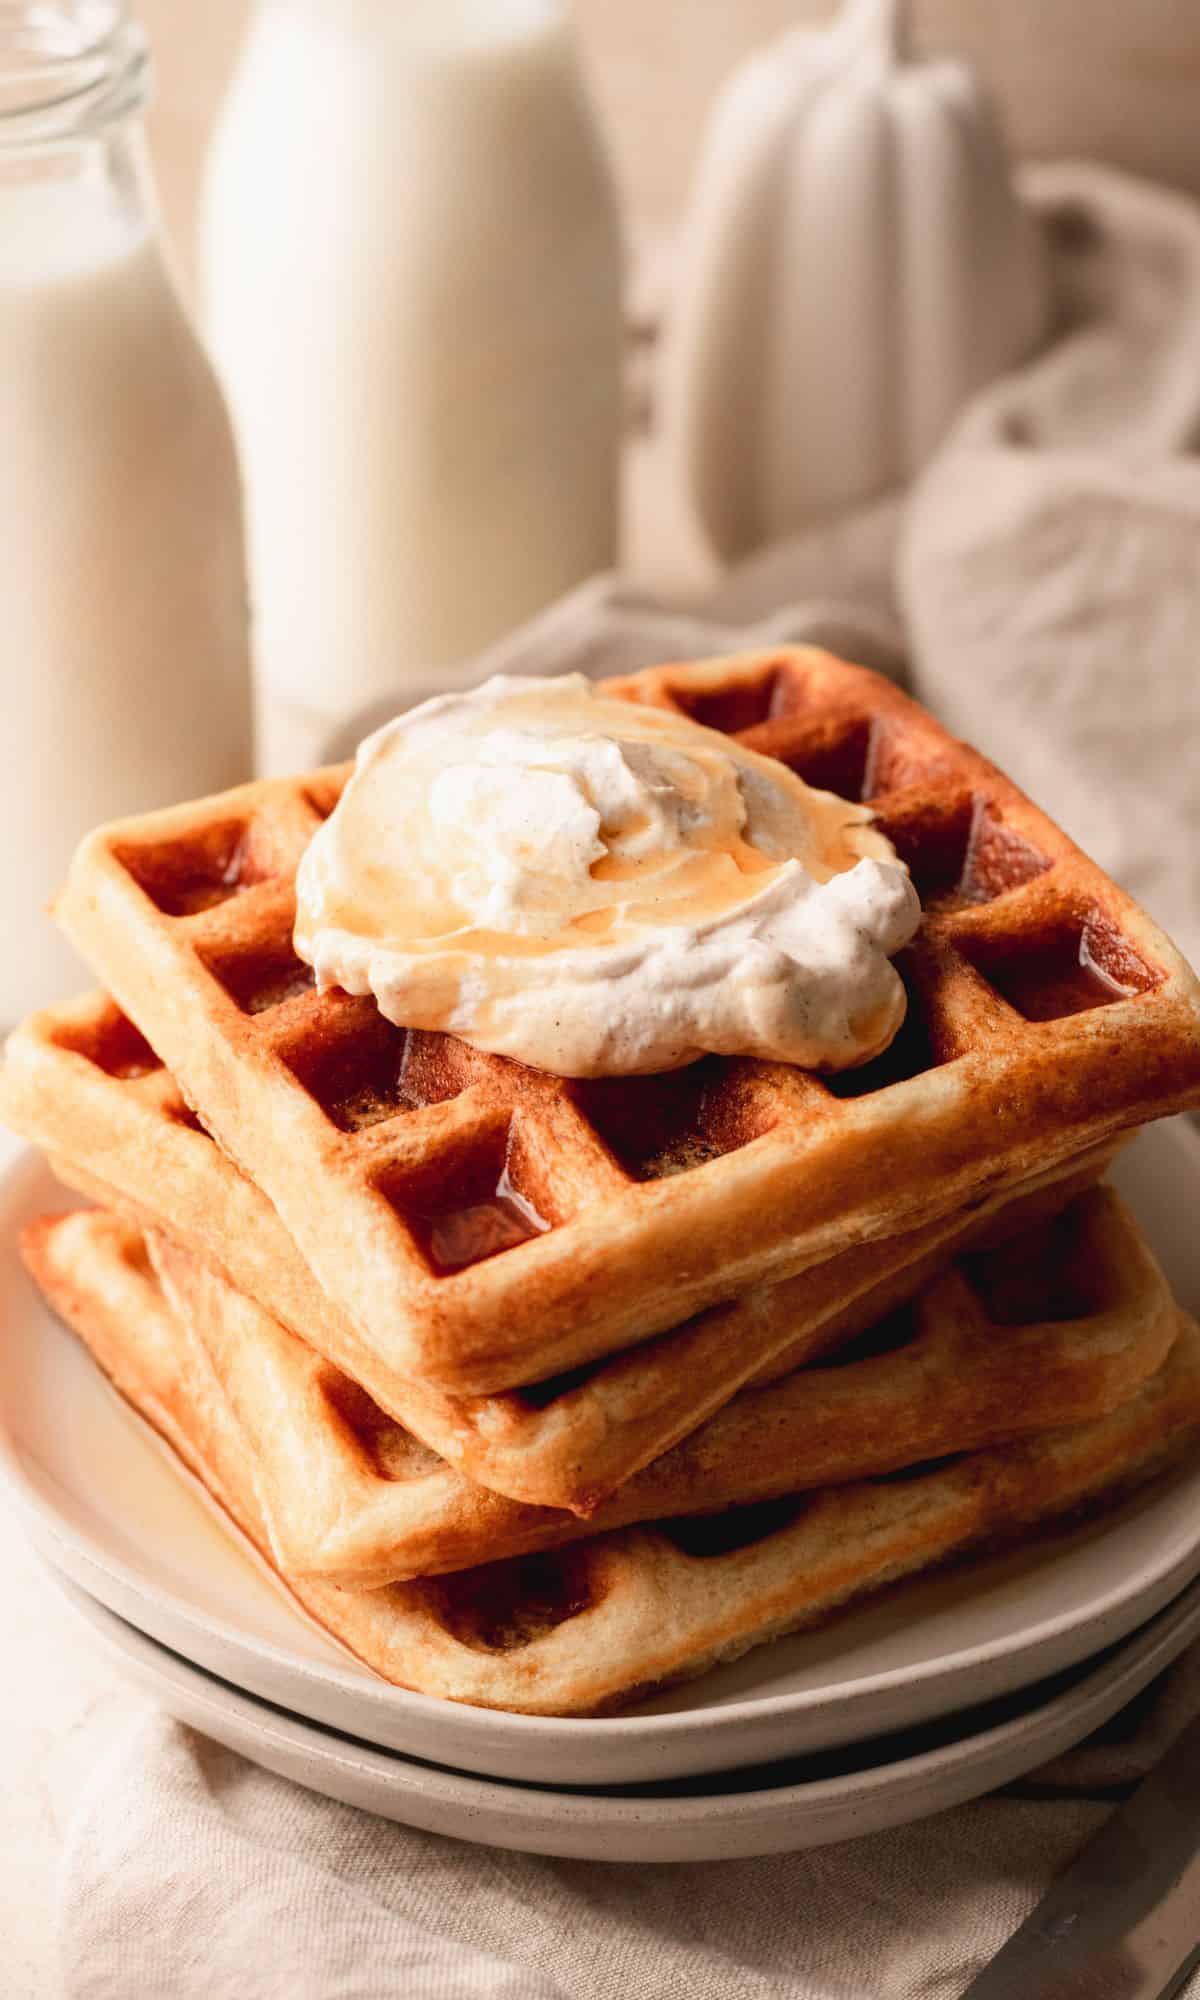 Belgian waffles topped with whipped cream on a white plate.